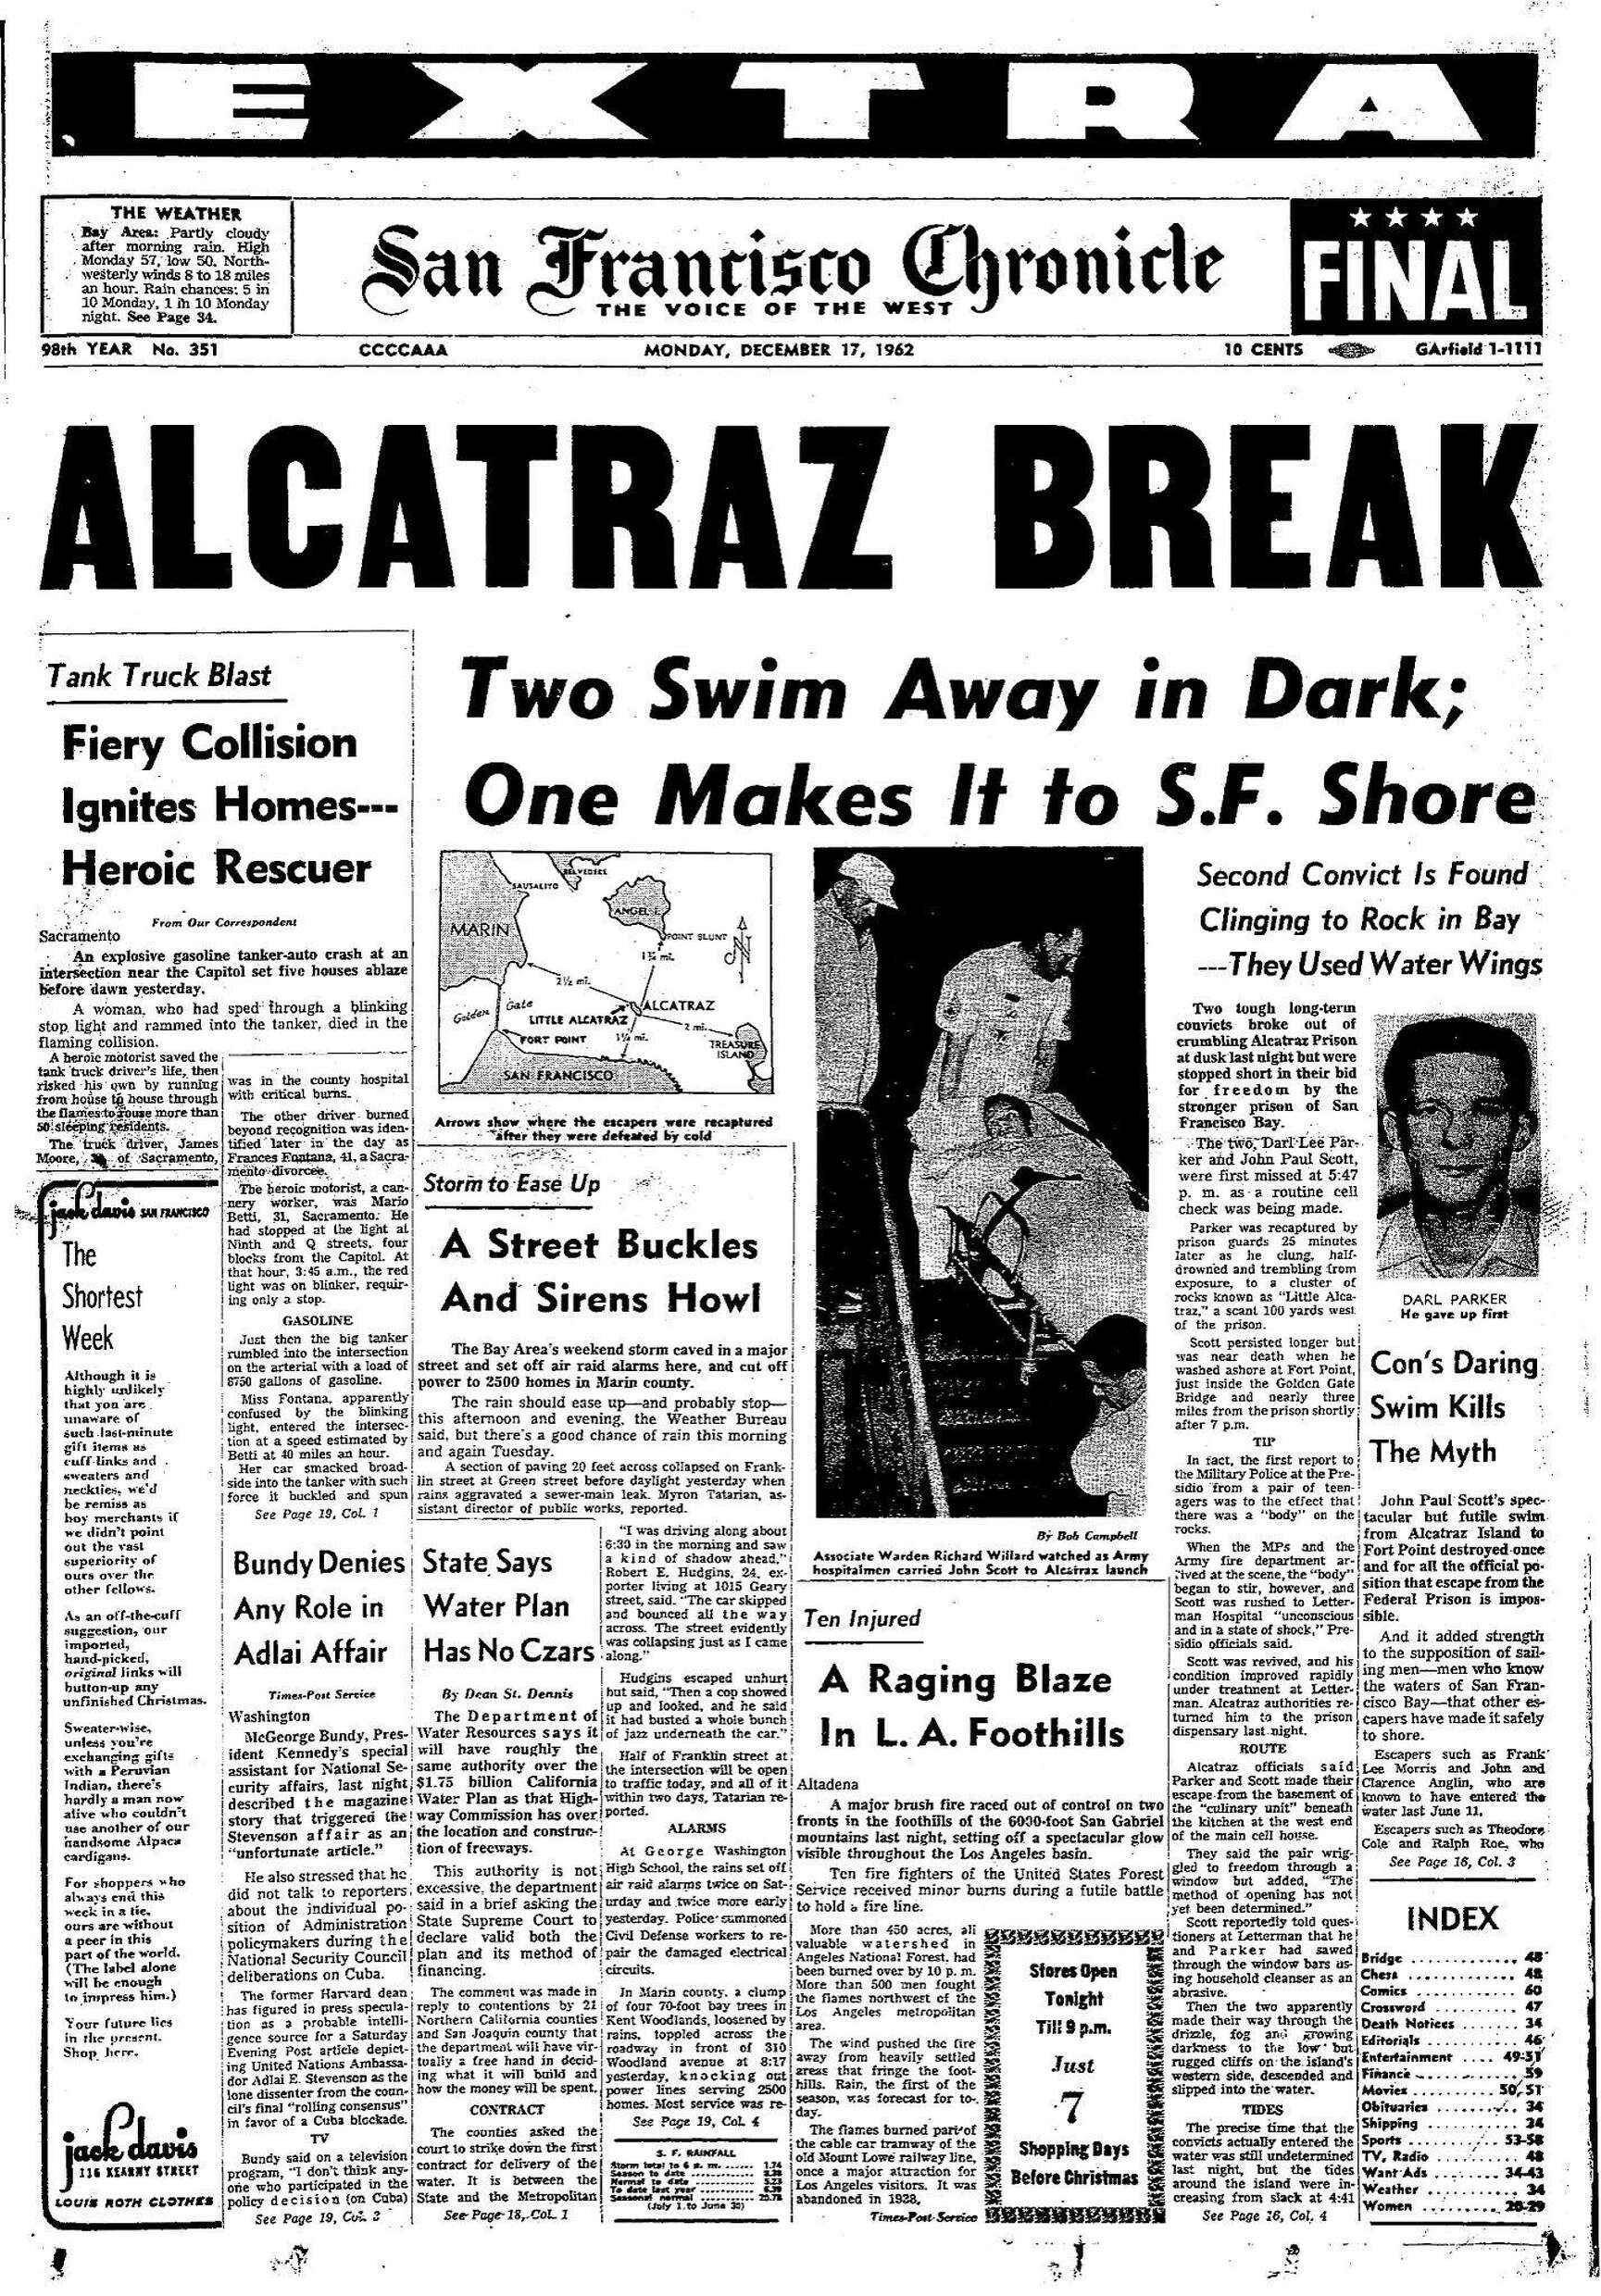 Escape from Alcatraz: 50 years later, mystery remains